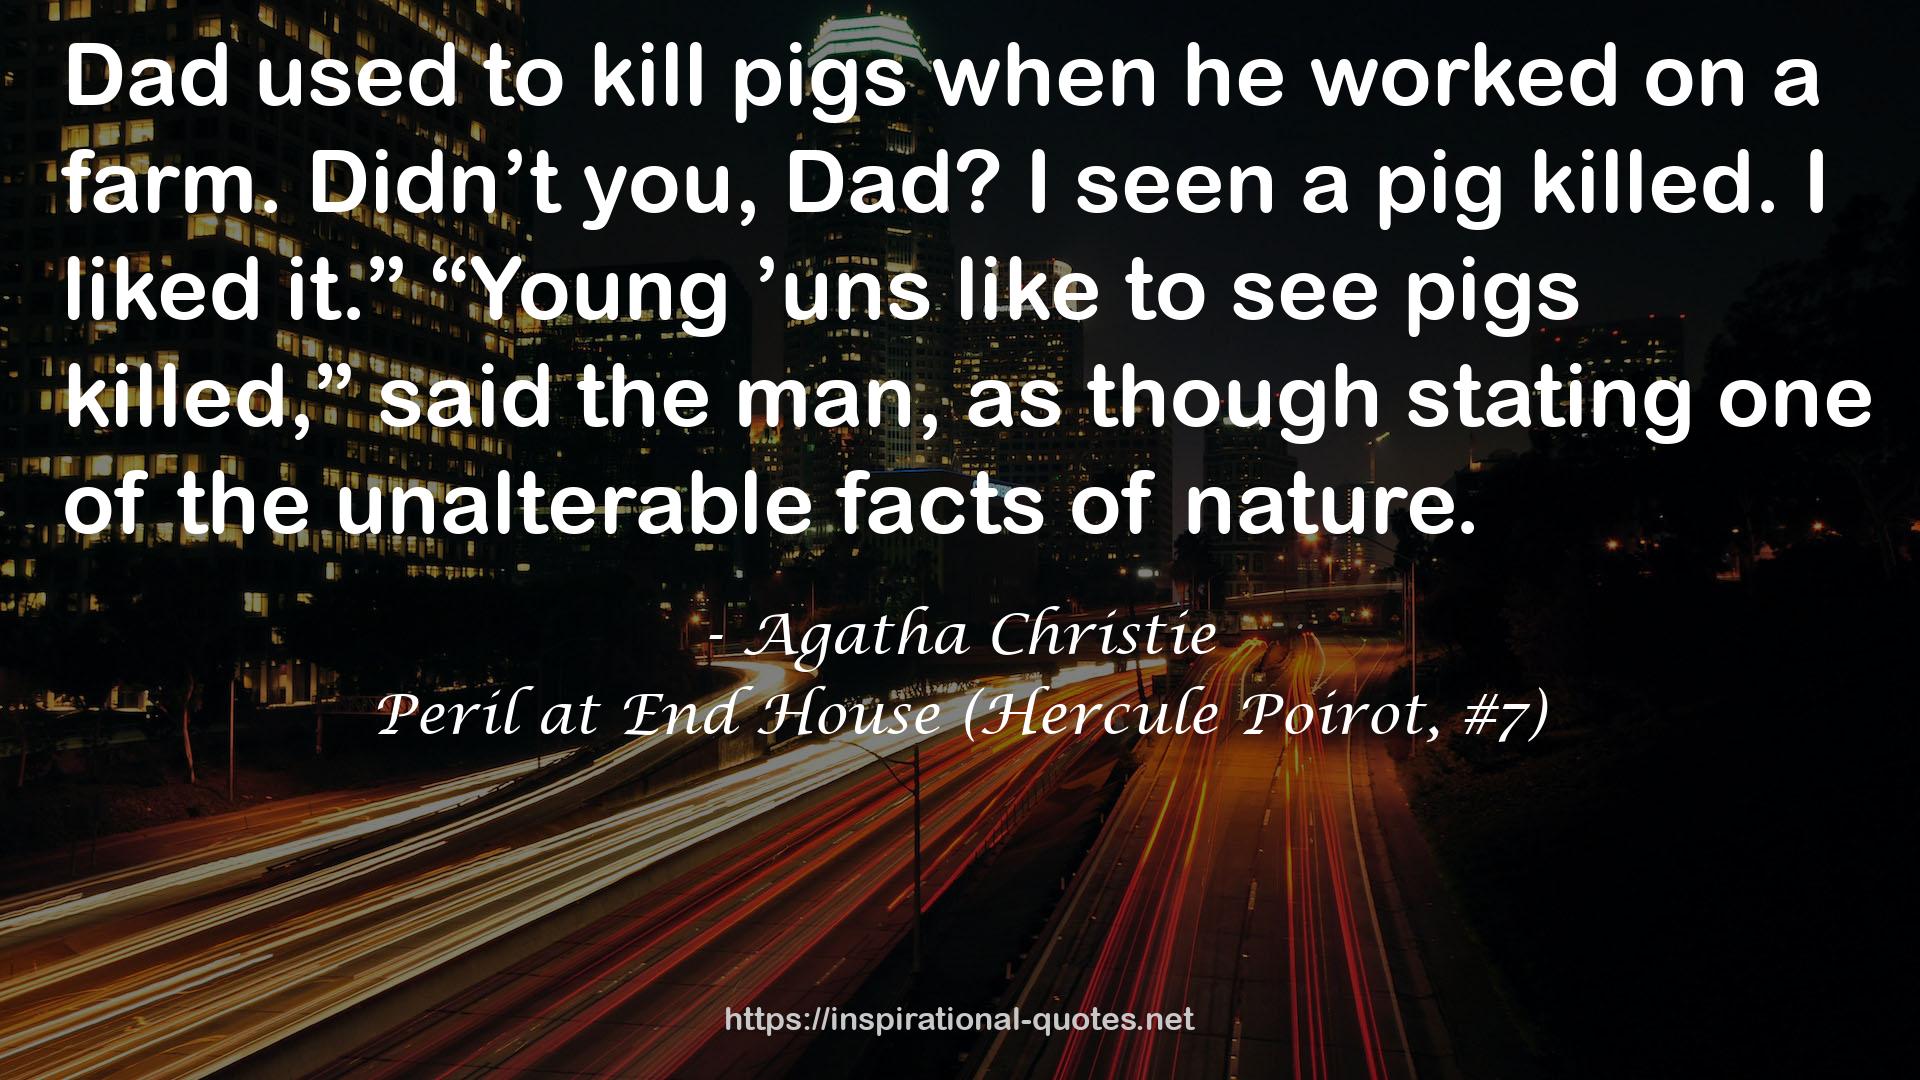 Peril at End House (Hercule Poirot, #7) QUOTES